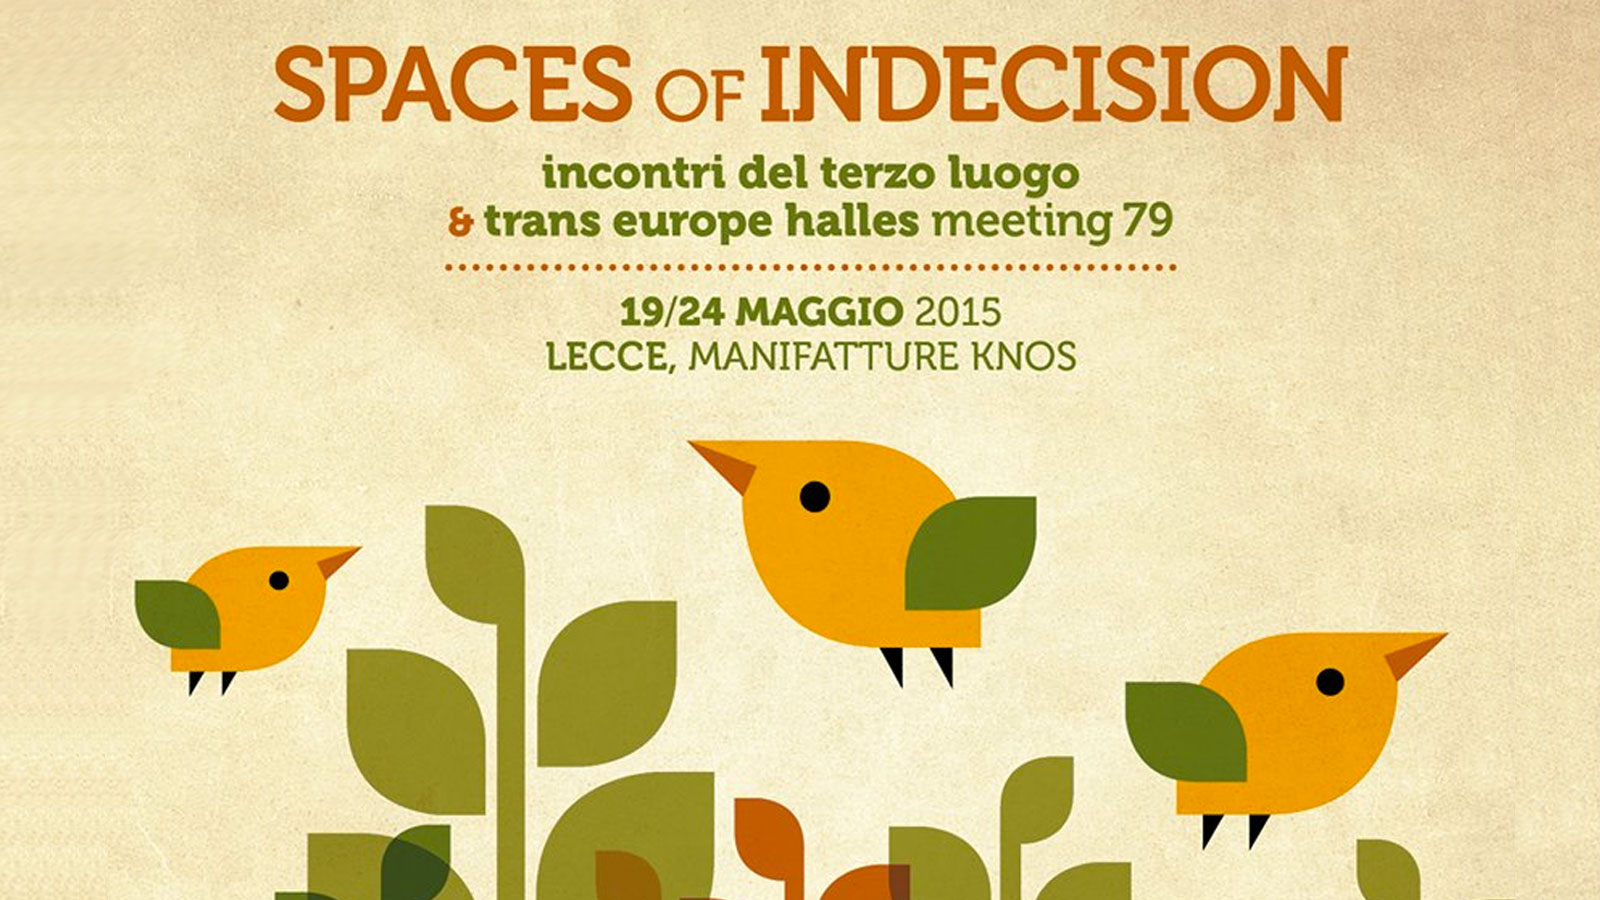 Spaces of Indecision alle Manifatture Knos di Lecce